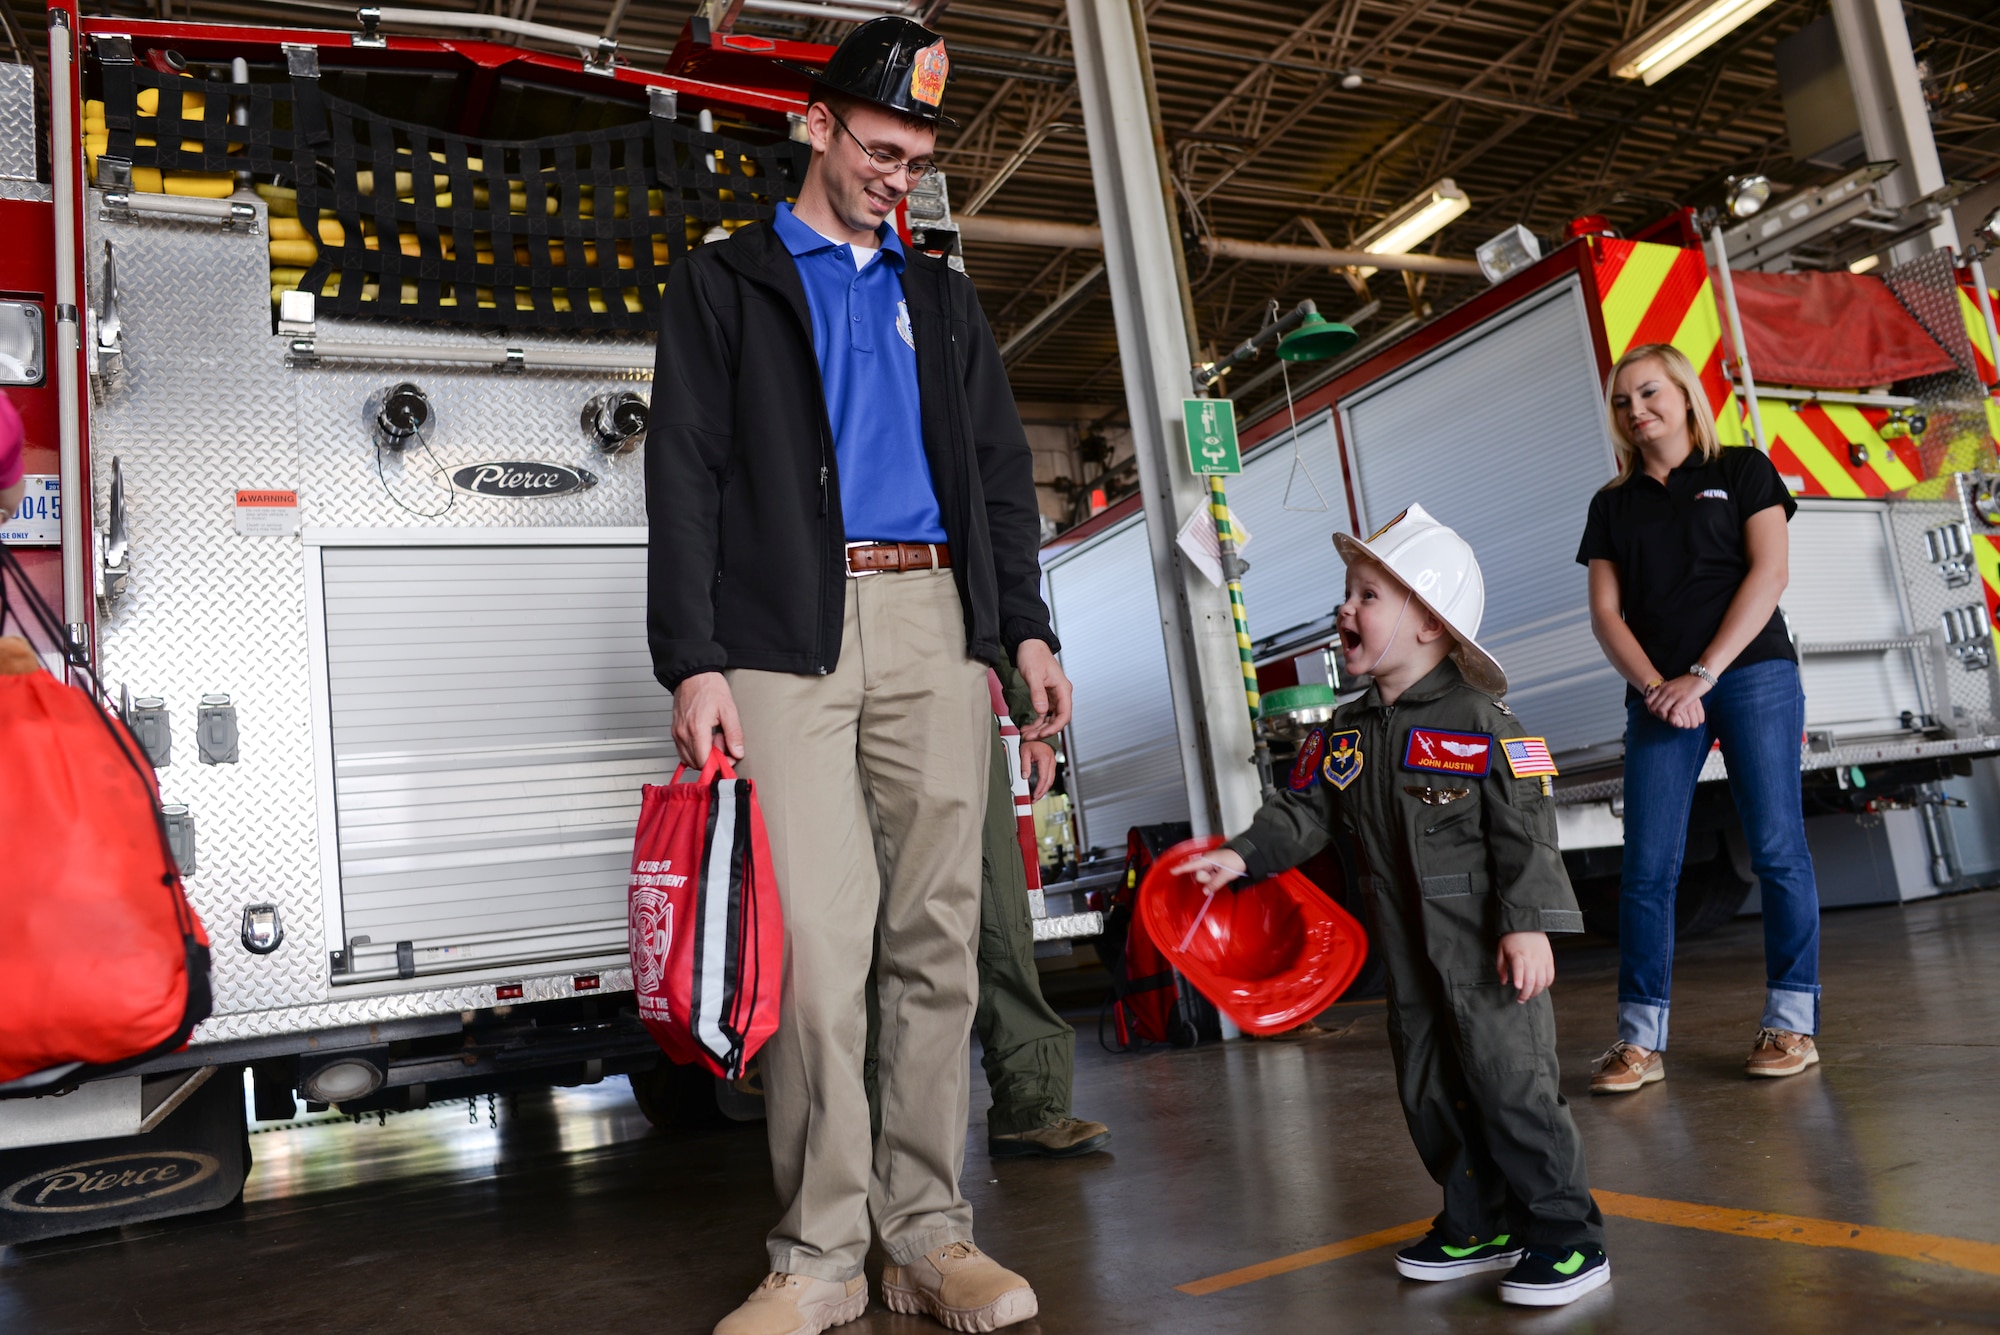 Two-year-old John Austin laughs with his father, Jason, after touring the base fire department May 15, 2014, at Altus Air Force Base, Oklahoma. The Austin family is stationed at Tinker Air Force Base, and had the opportunity to visit Altus AFB as part of the Altus Pilot for a Day program. (U.S. Air Force photo/Staff Sgt. Nathanael Callon) 